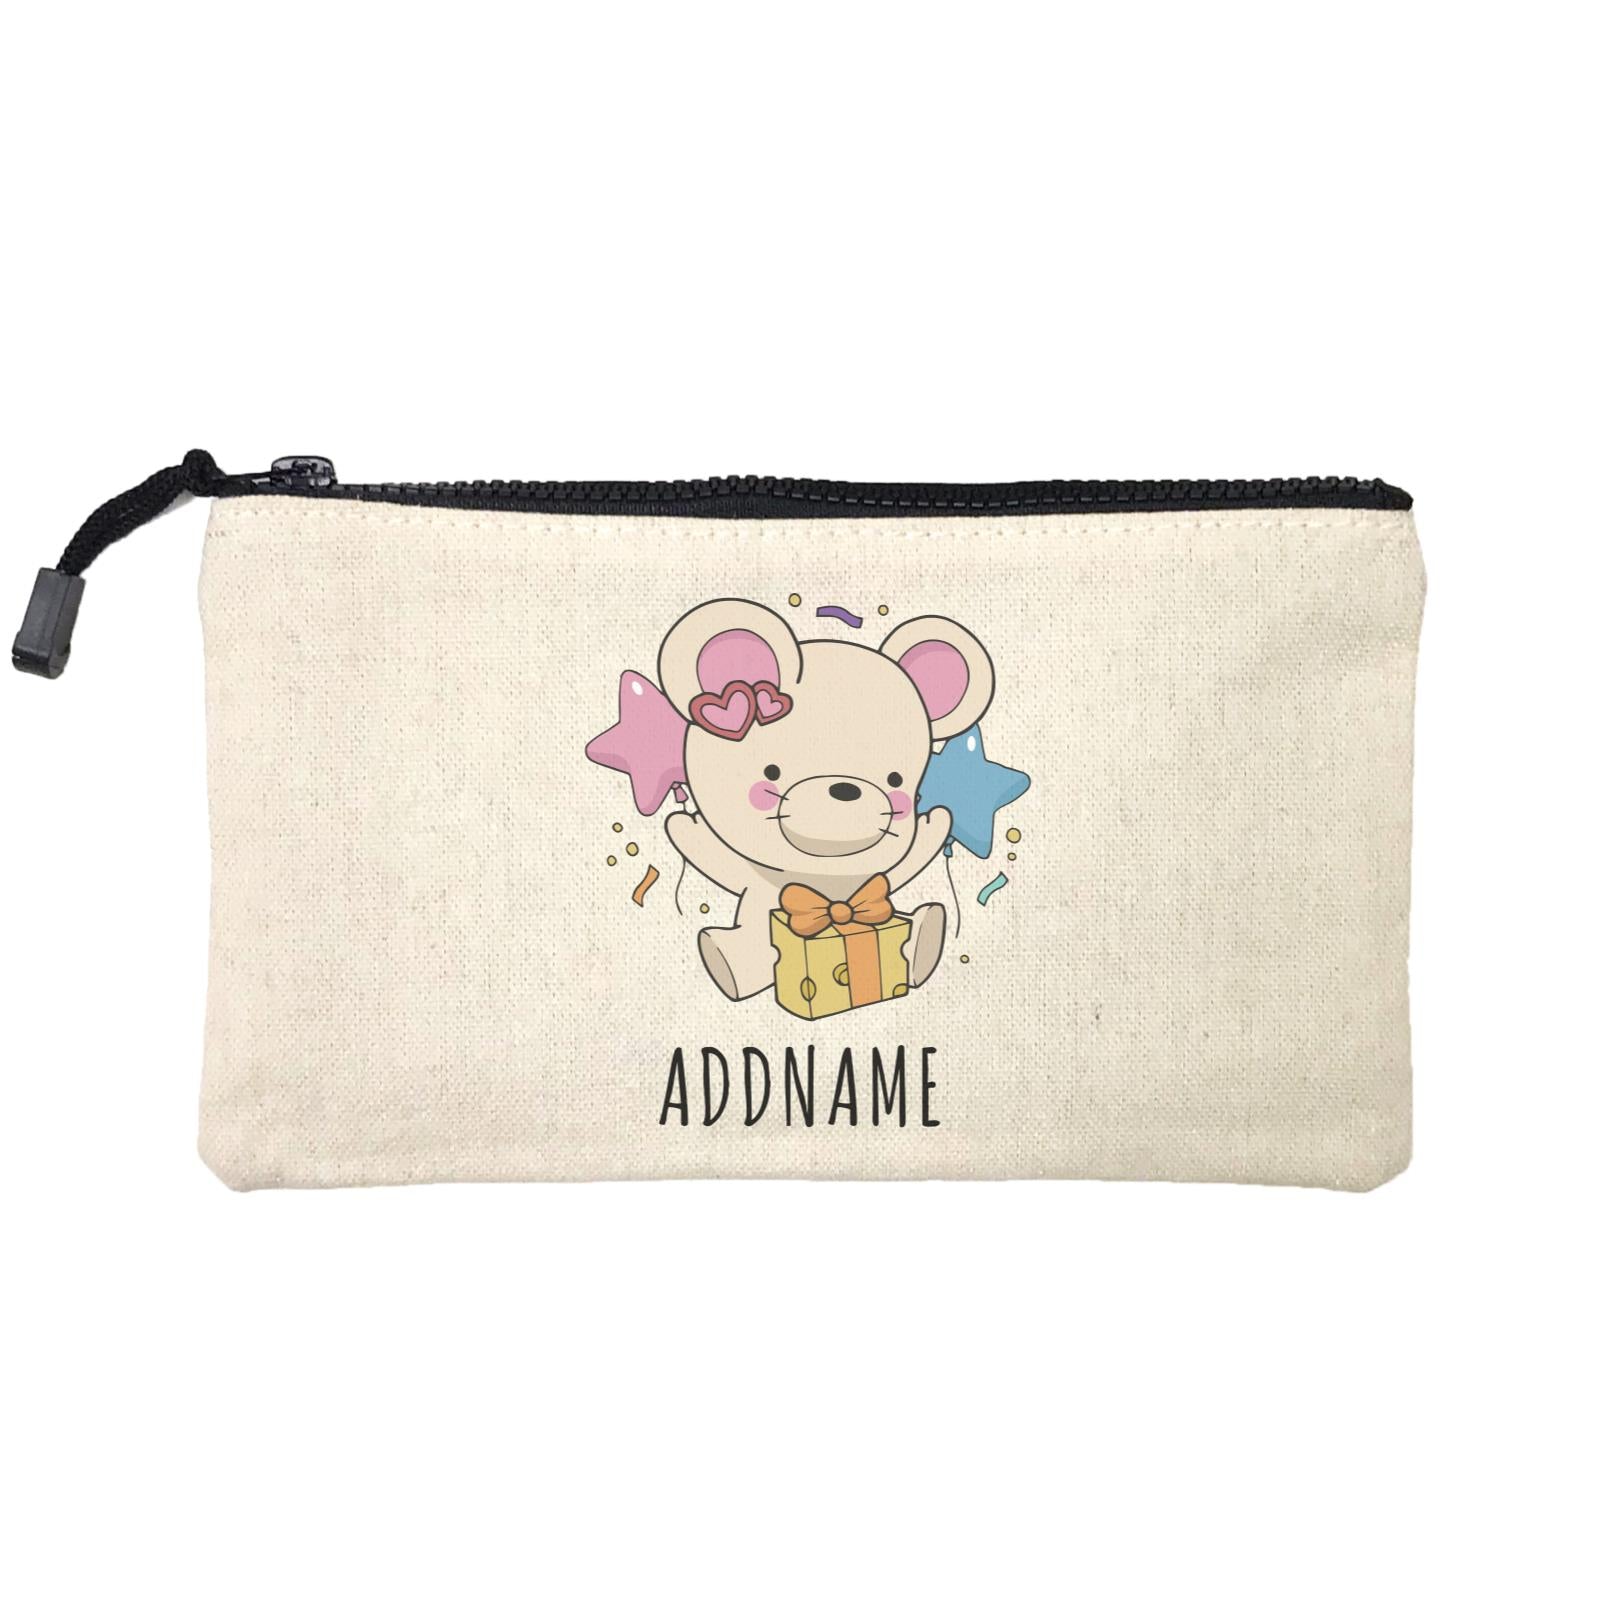 Birthday Sketch Animals Mouse with Cheese Present Addname Mini Accessories Stationery Pouch